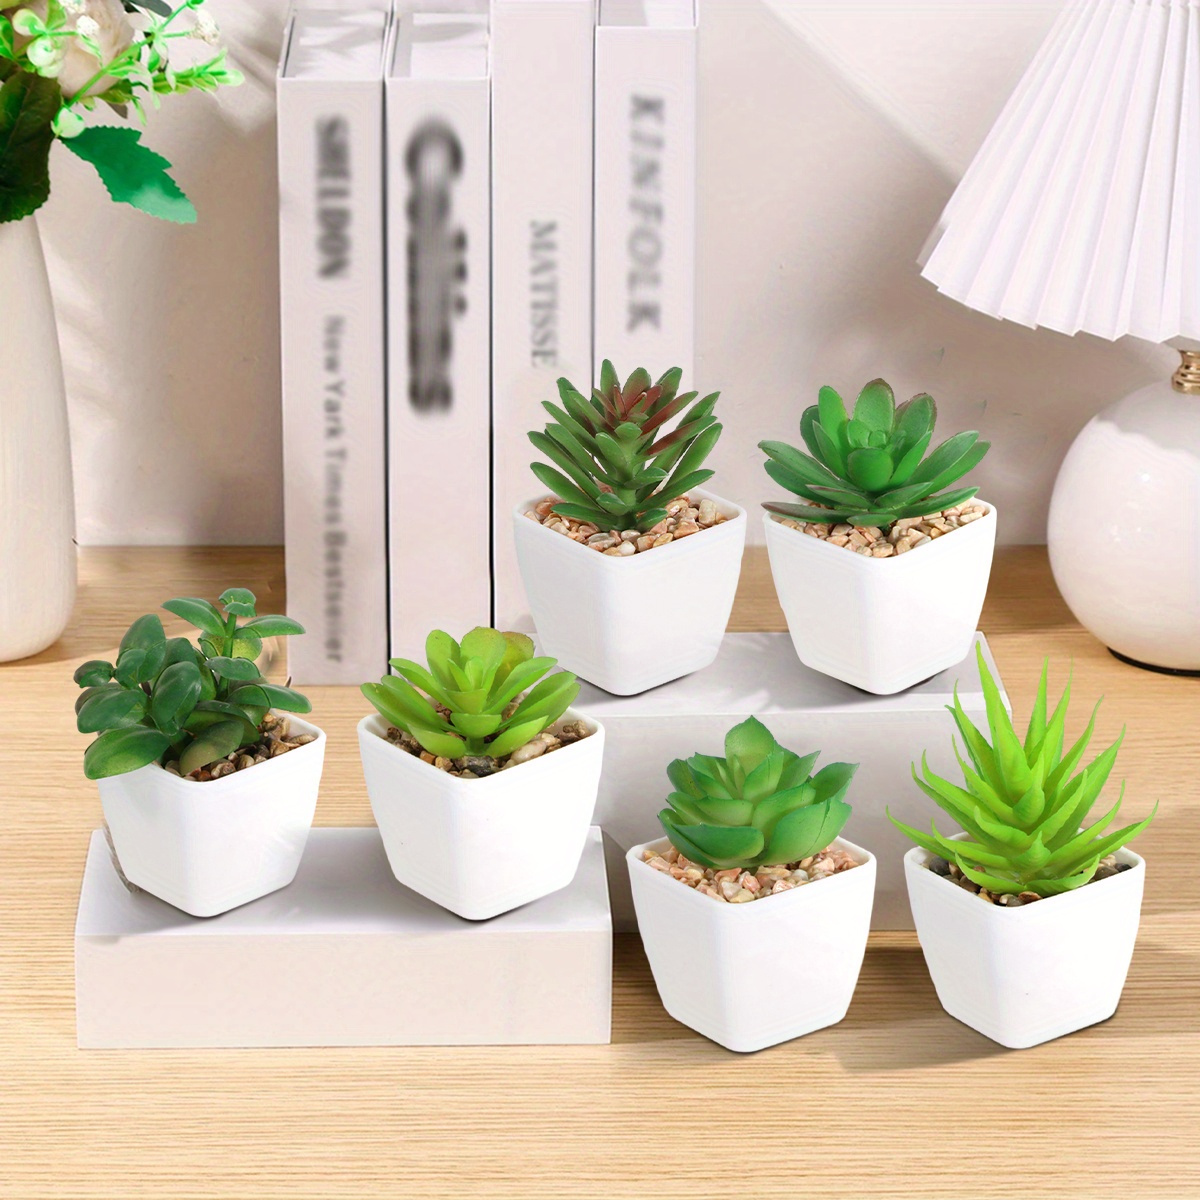 

6-pack Artificial Succulent Plants With Pots - Home Decor Faux Aloe Tabletop Greenery For Various Room Types, Plastic Plants For Reunion & All-season Use, Father's Day, Mother's Day, Graduation Decor